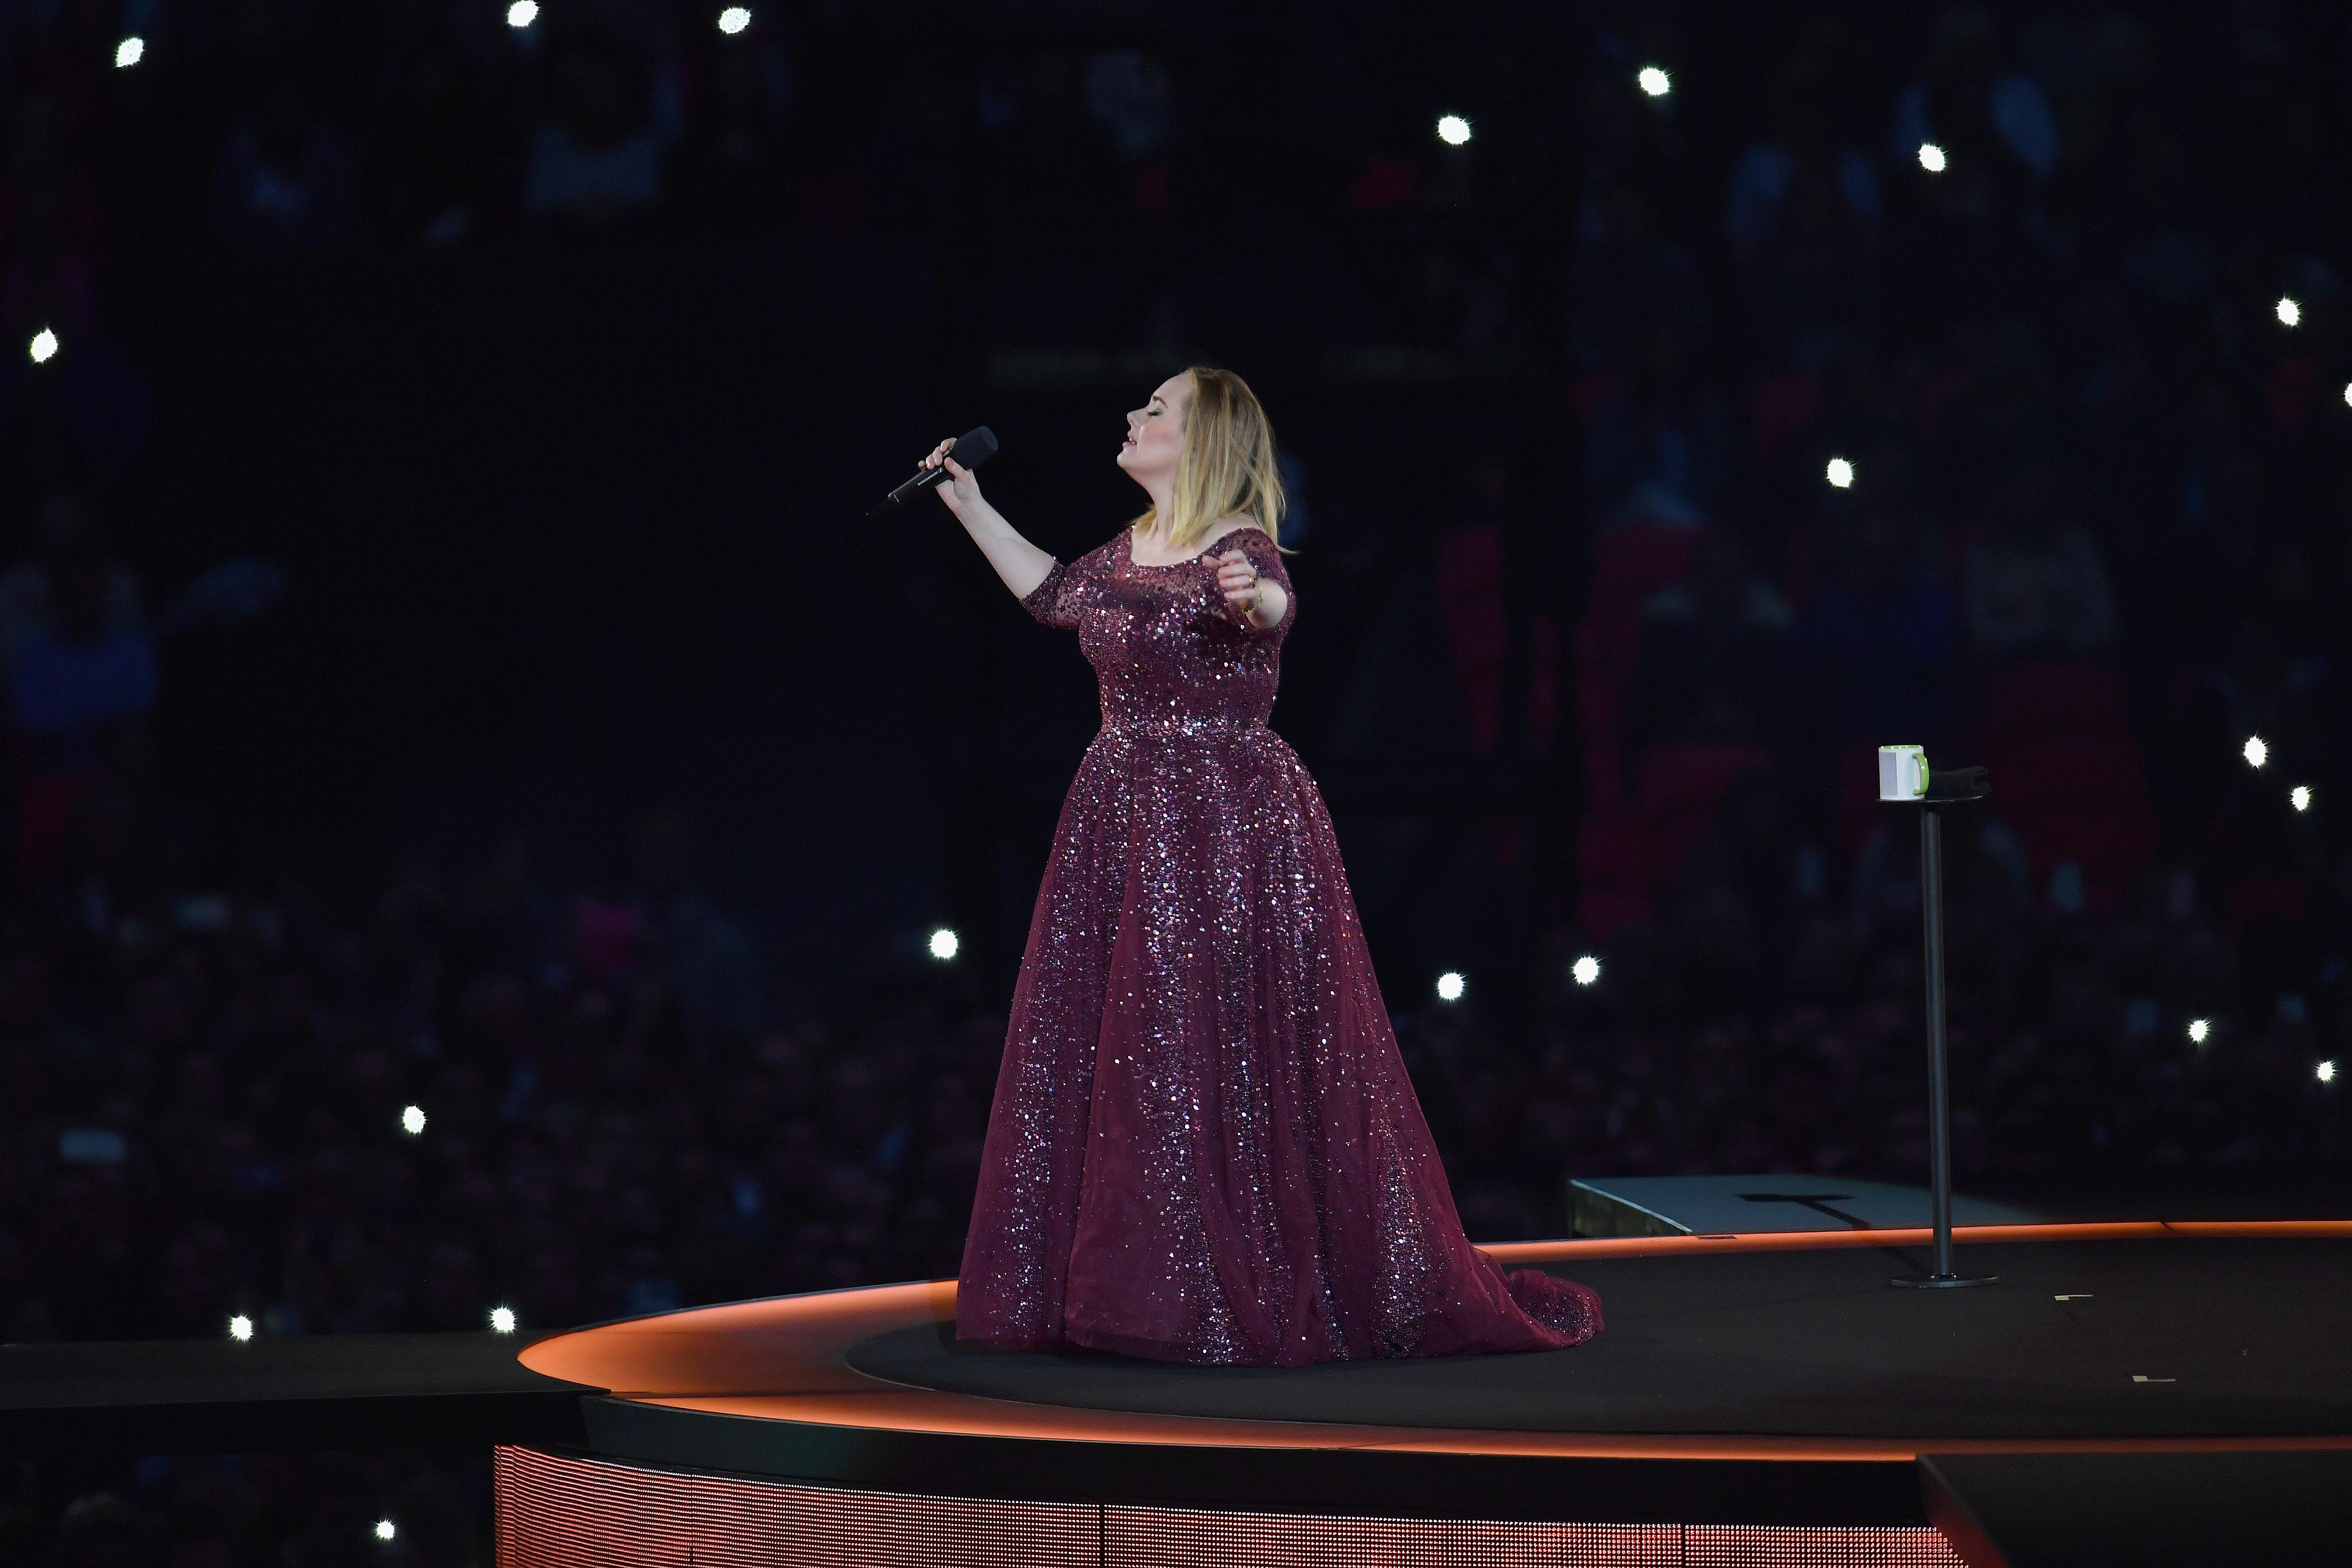 A blonde woman stands on a stage, singing against a black starry backdrop.